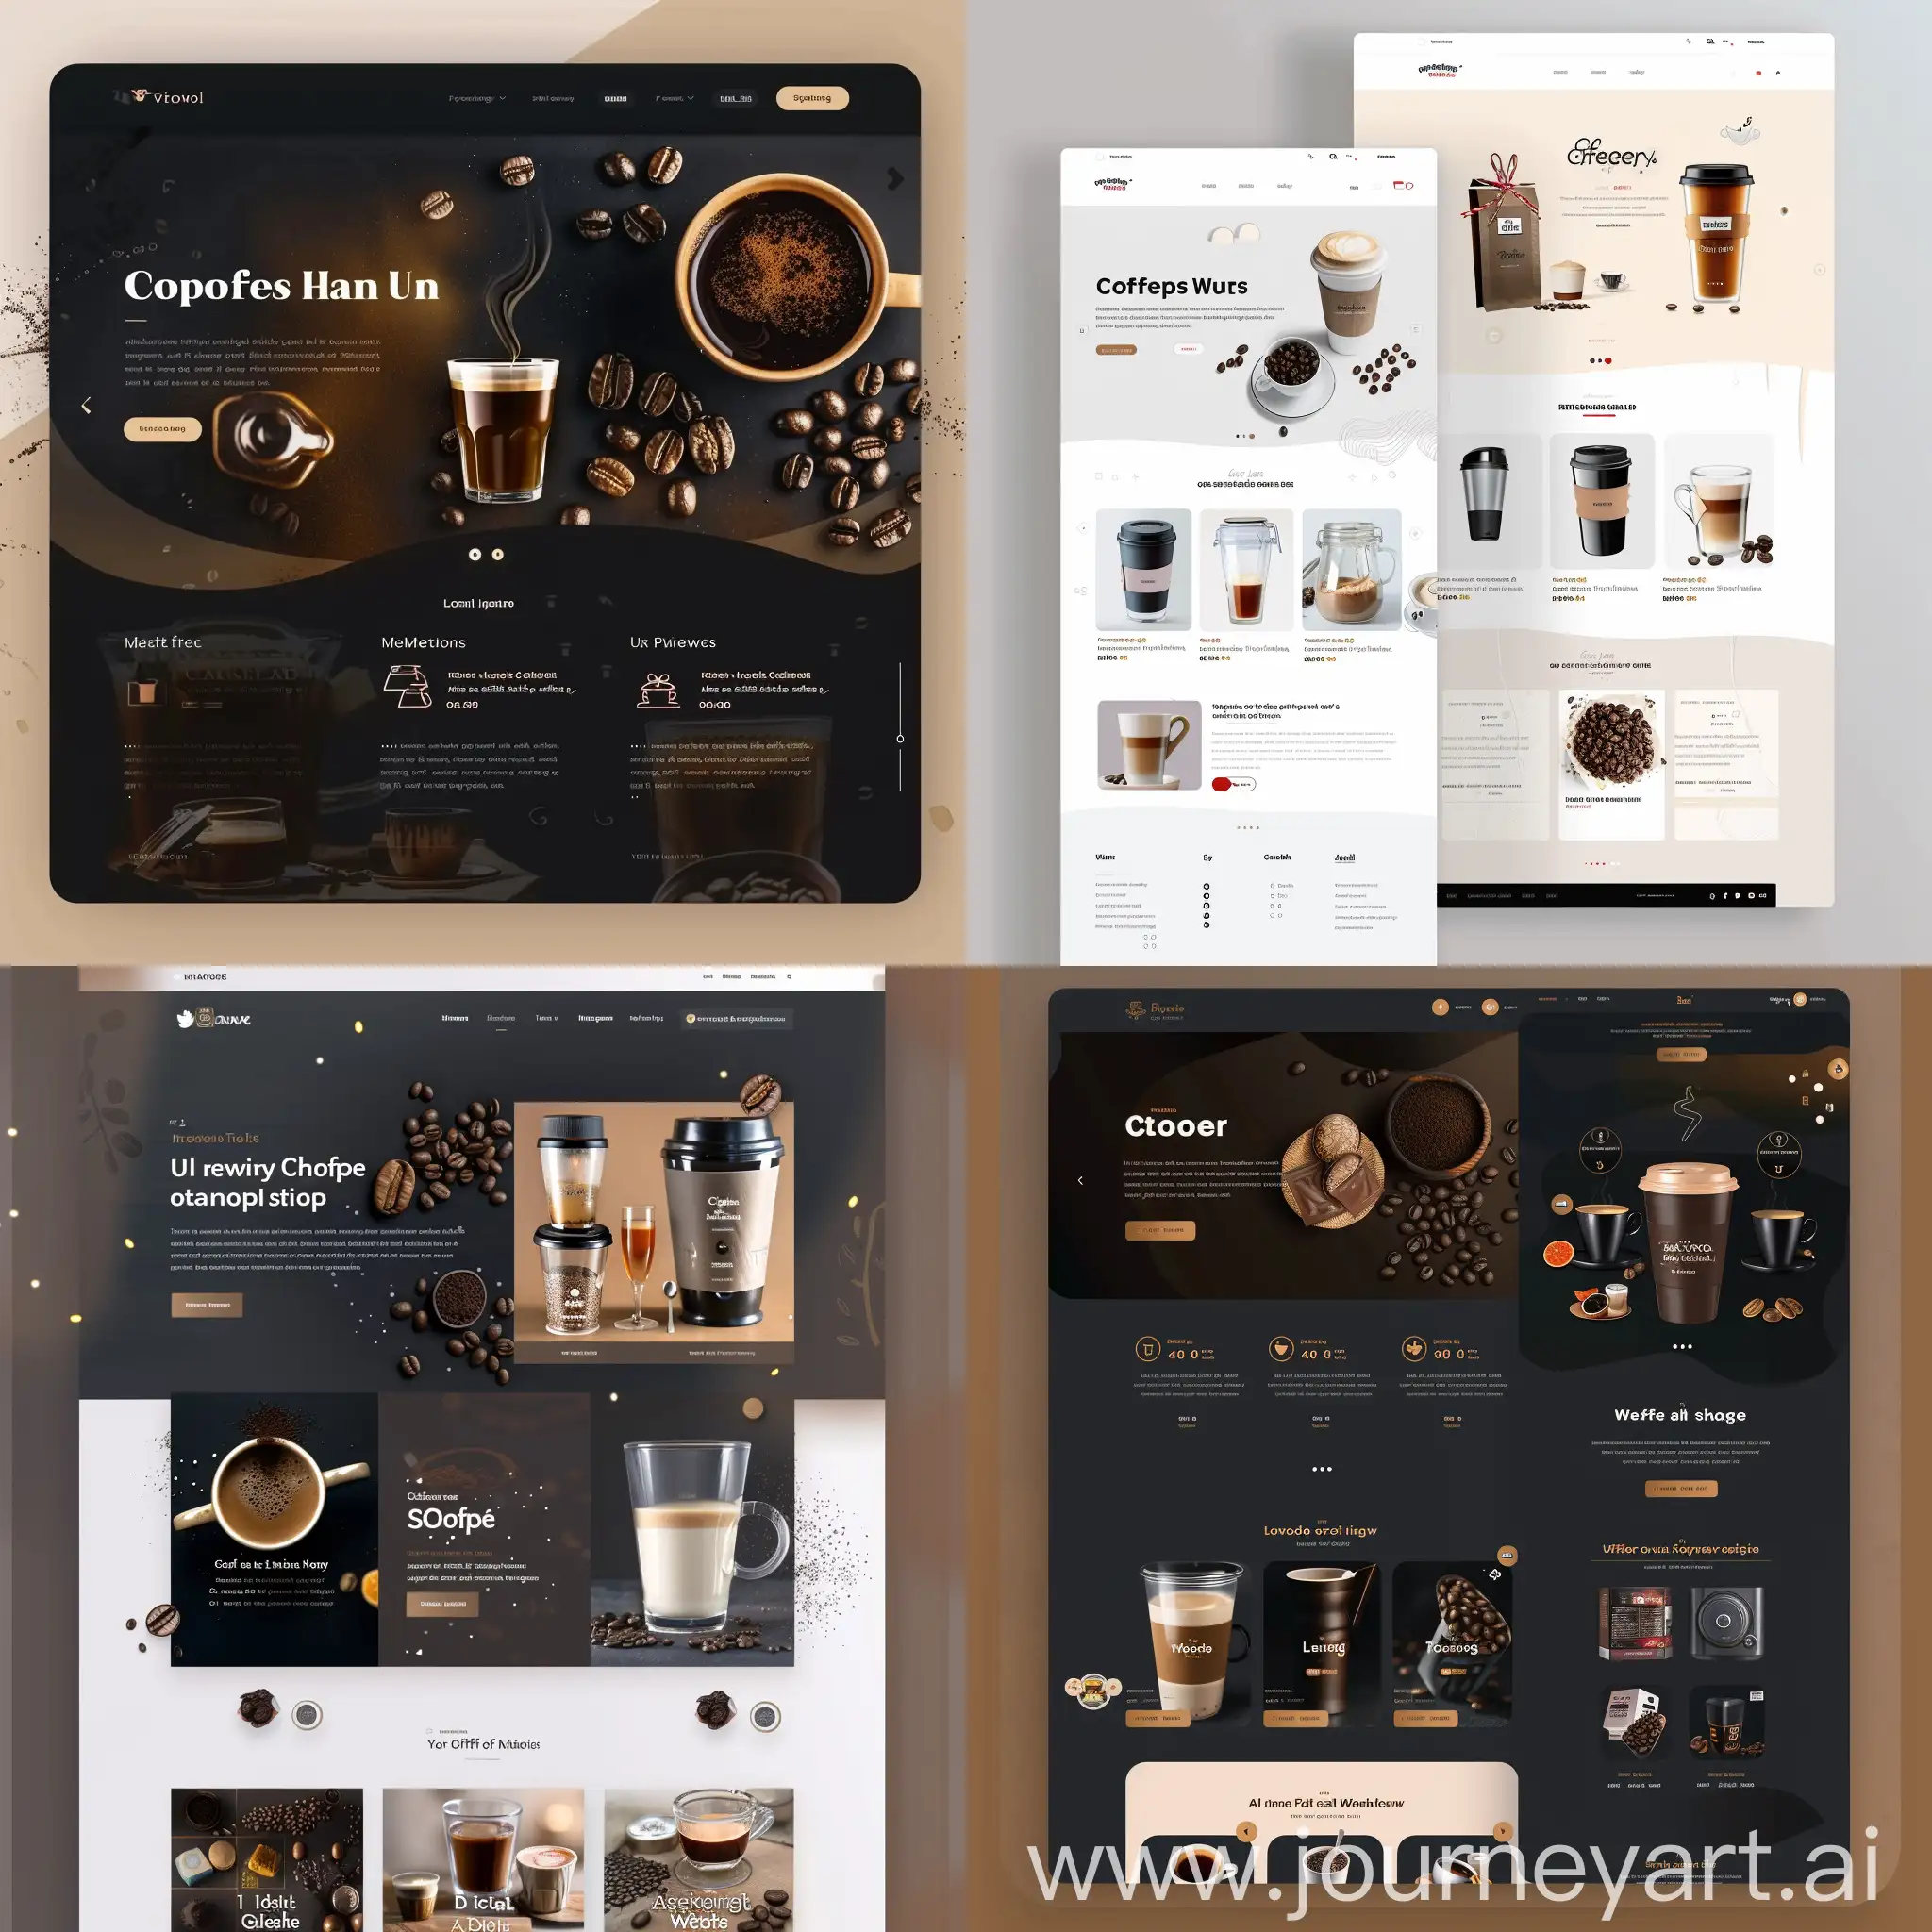 ui design of a coffee online shop website's home page